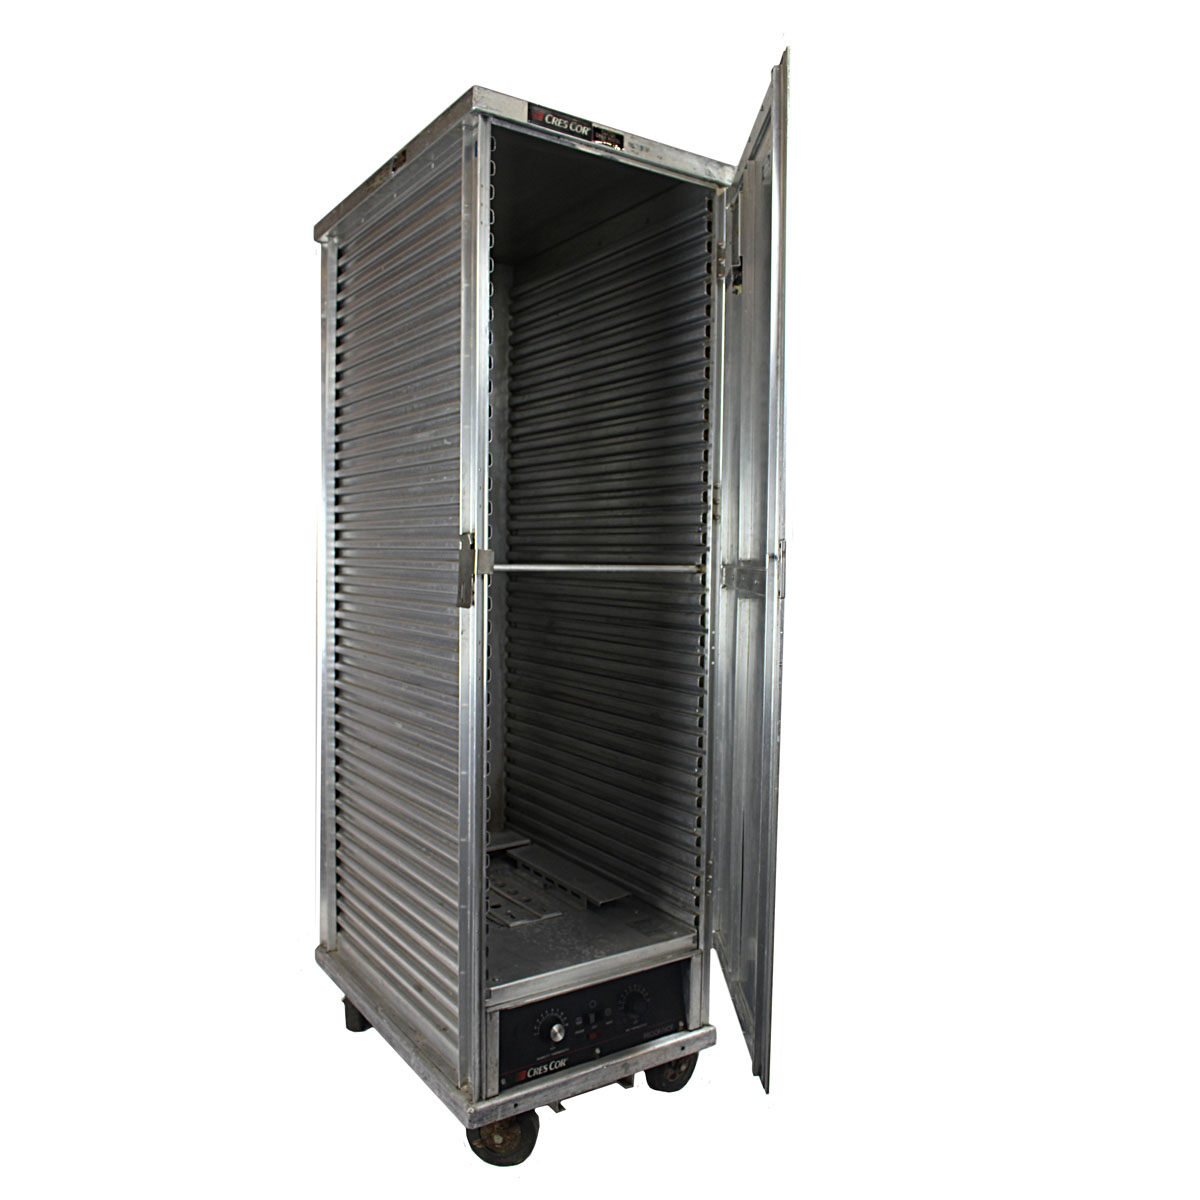 https://www.cantonchairrental.com/Resources/Images/Equipment_Guide/HotBox_NonIsulated_Electric2_3455.jpg